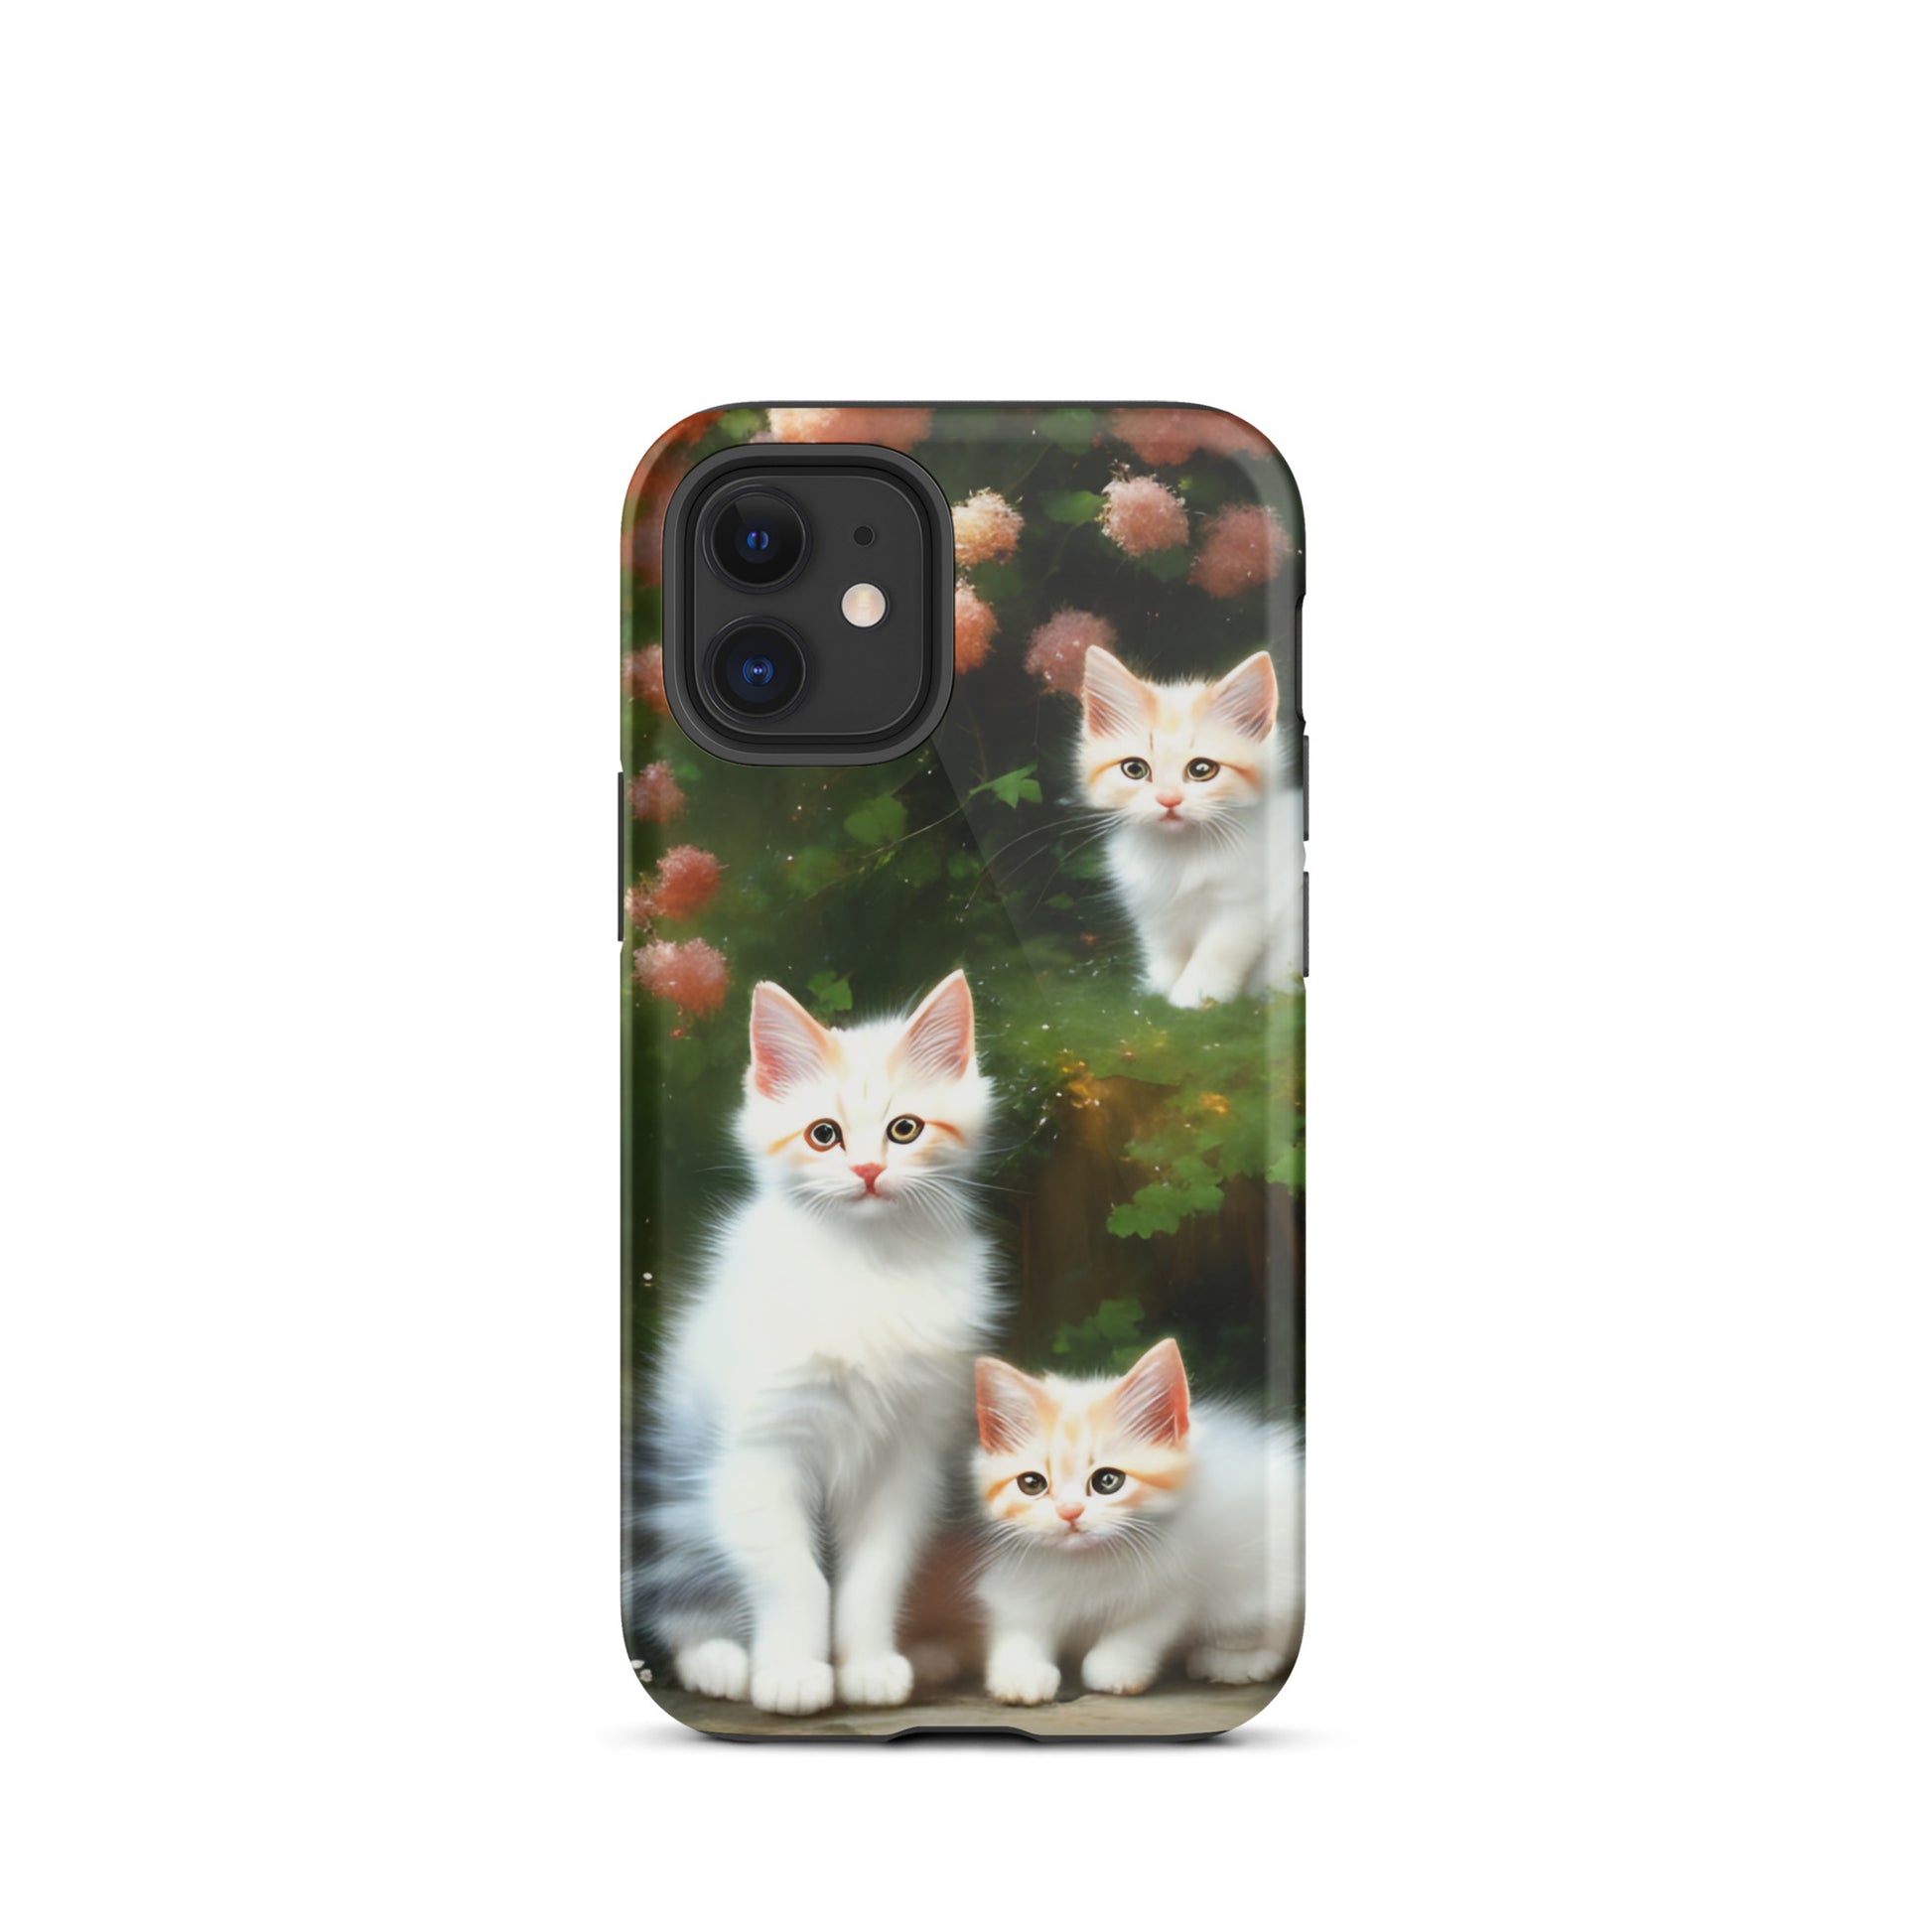 A picture of a iphone tough case with 3 fluffy white and orange kittens and peach colored flowers in the background - glossy-iphone-12-mini-front